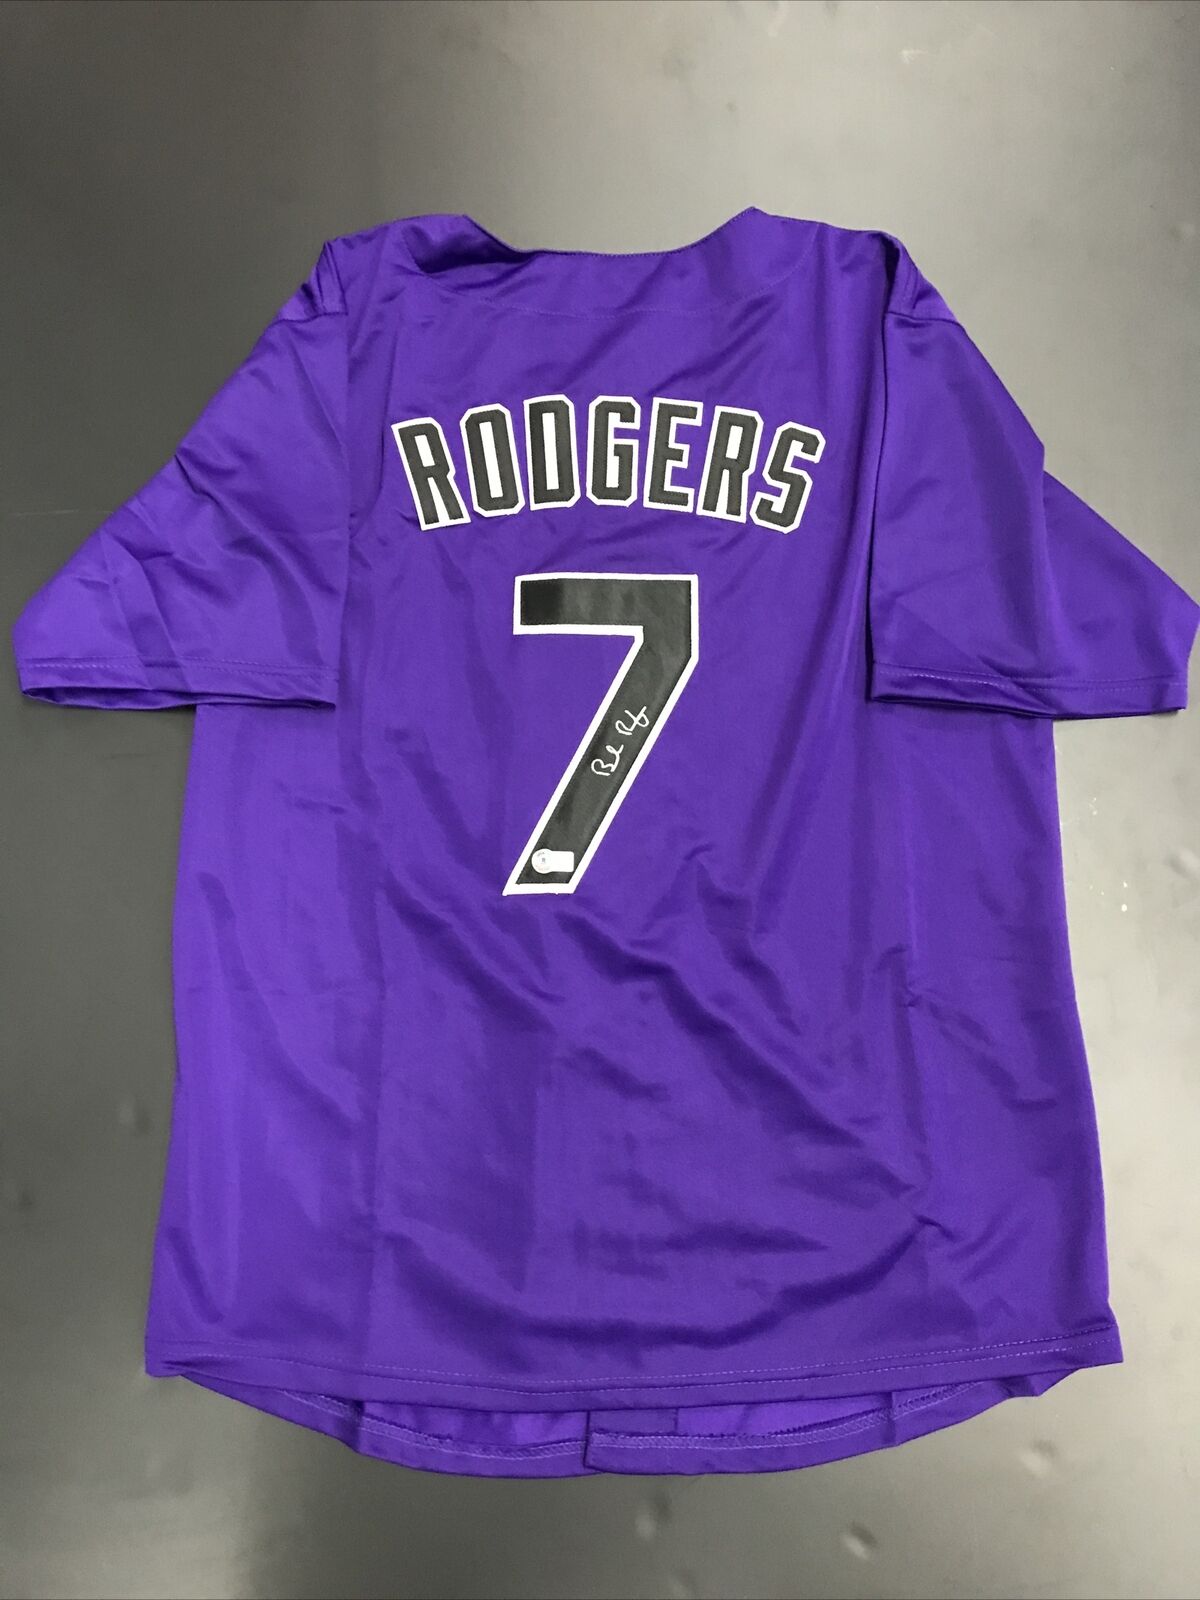 Brendan Rodgers Signed Jersey Colorado Rockies Home Autographed